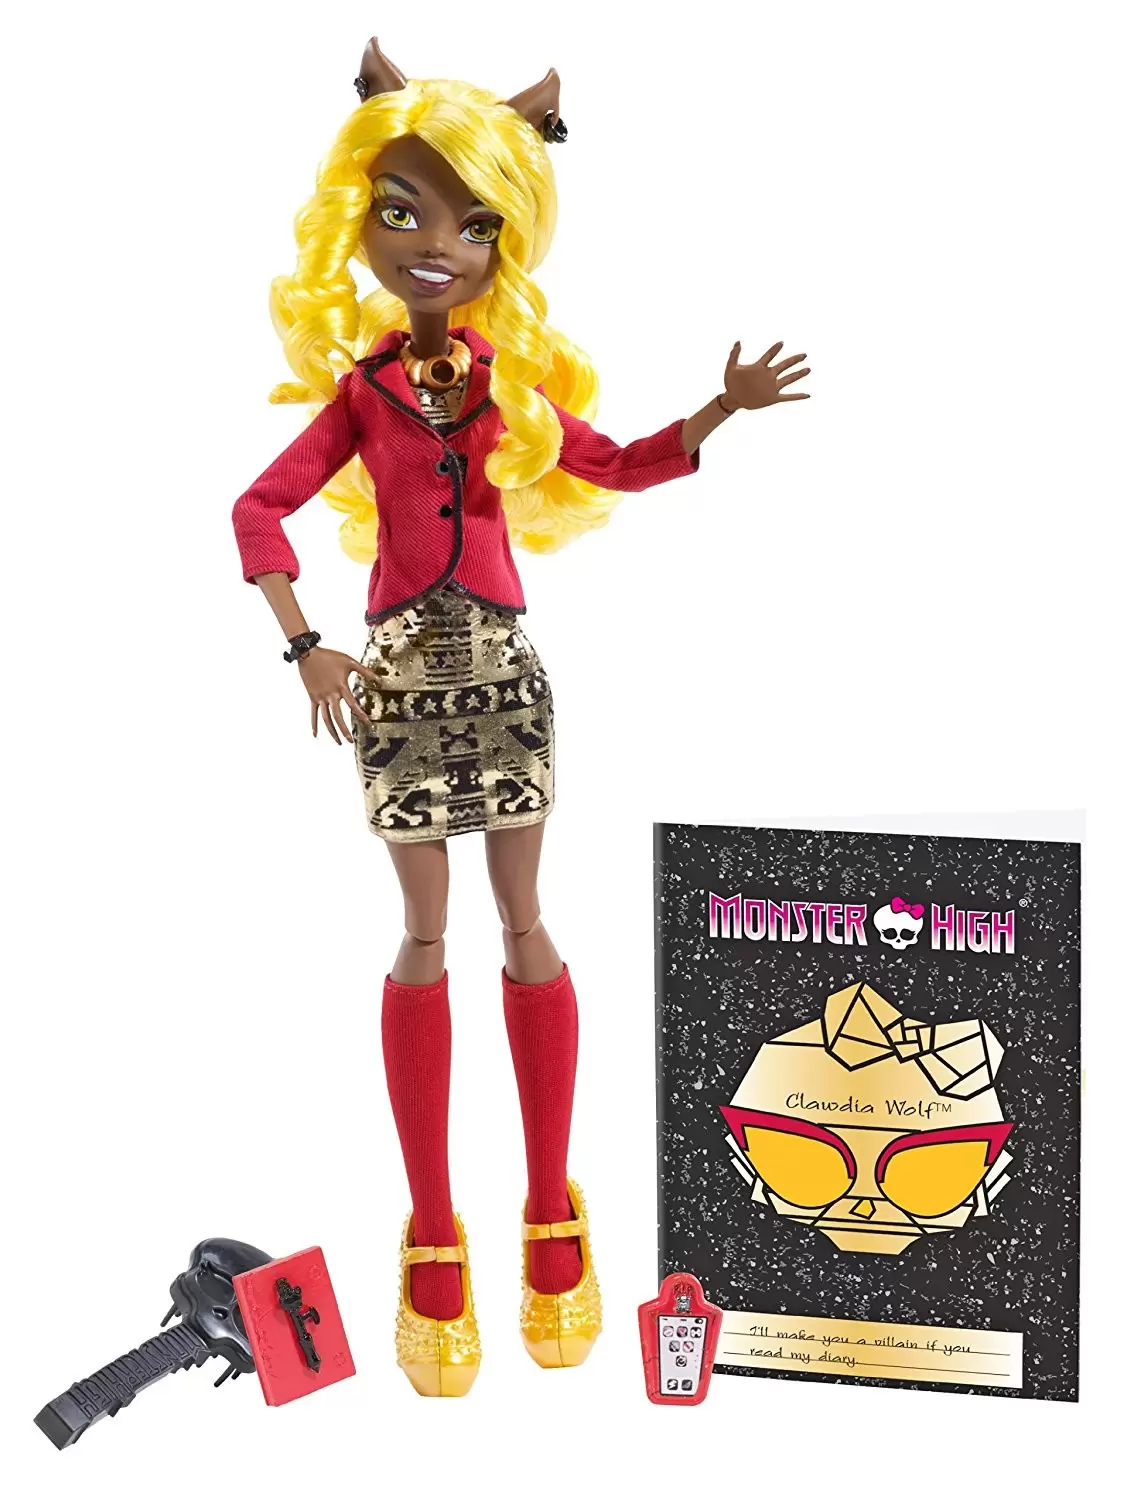 Monster High - Clawdia Wolf - Fille du Loup-garou - Frights, Camera, Action !